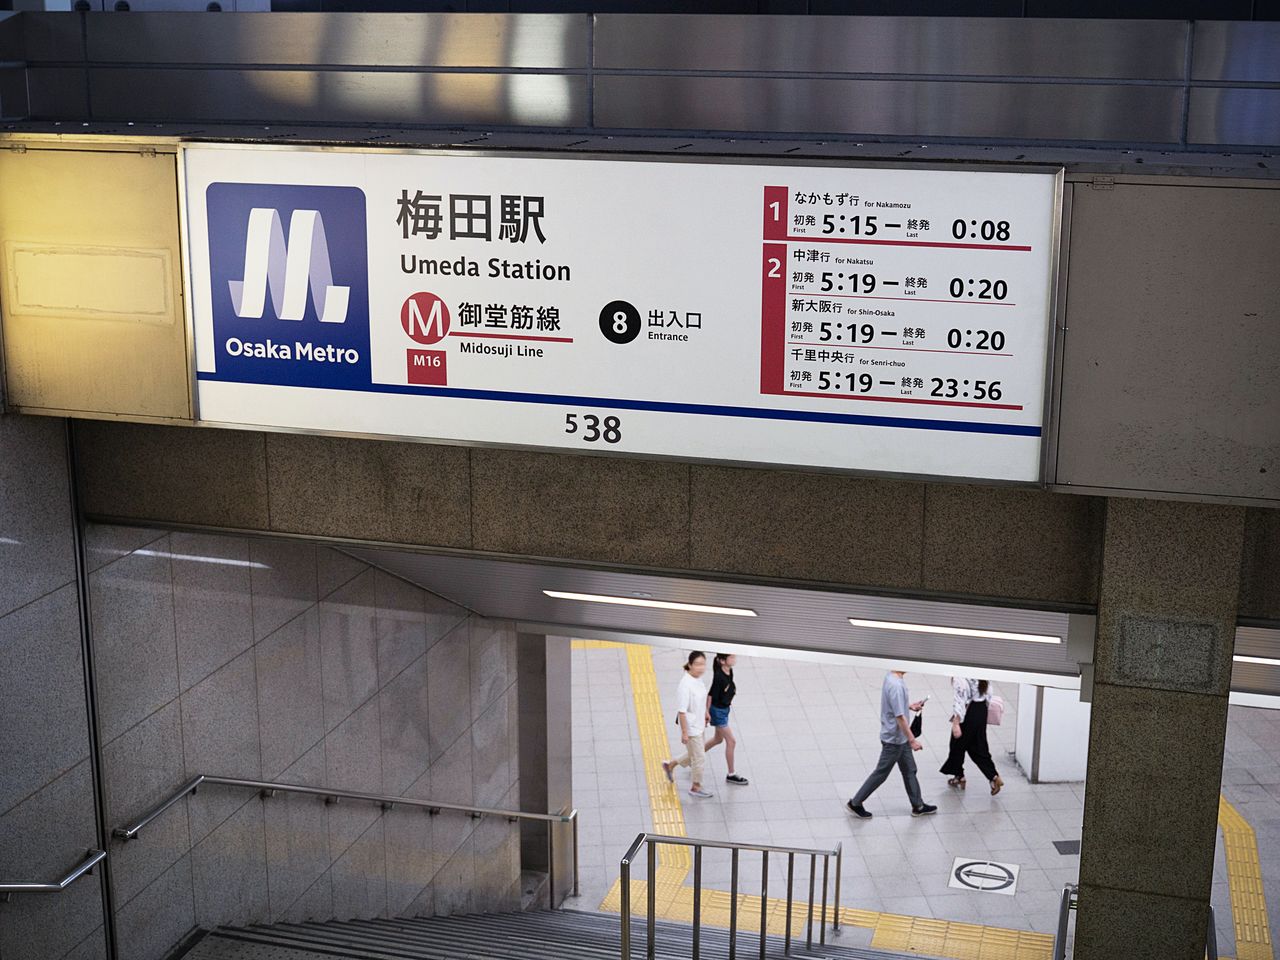 There are currently no plans to change the name of Umeda Metro Station.